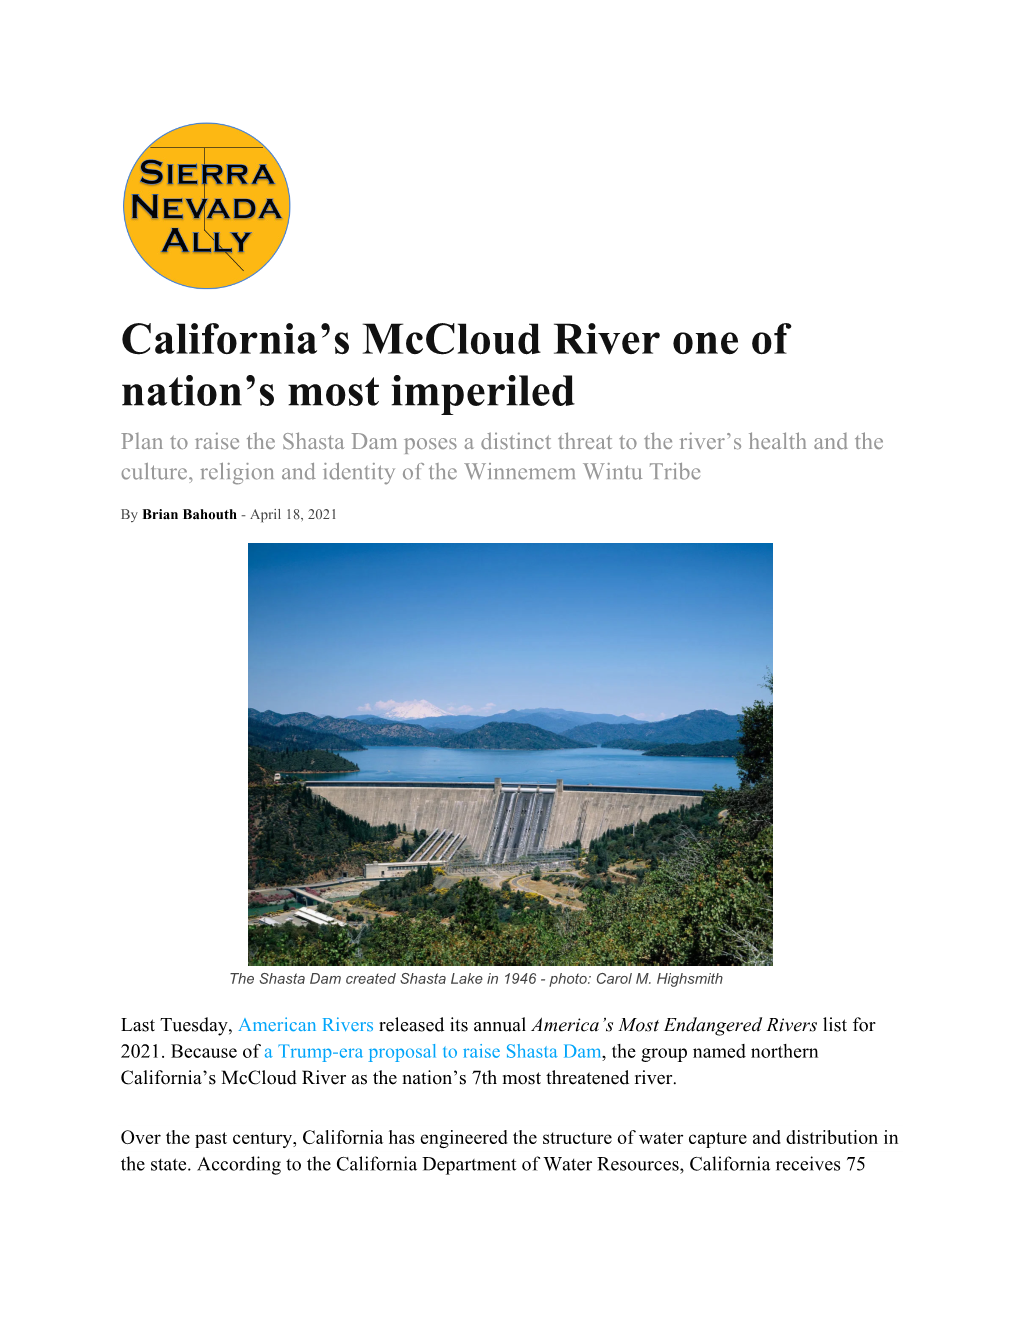 California's Mccloud River One of Nation's Most Imperiled